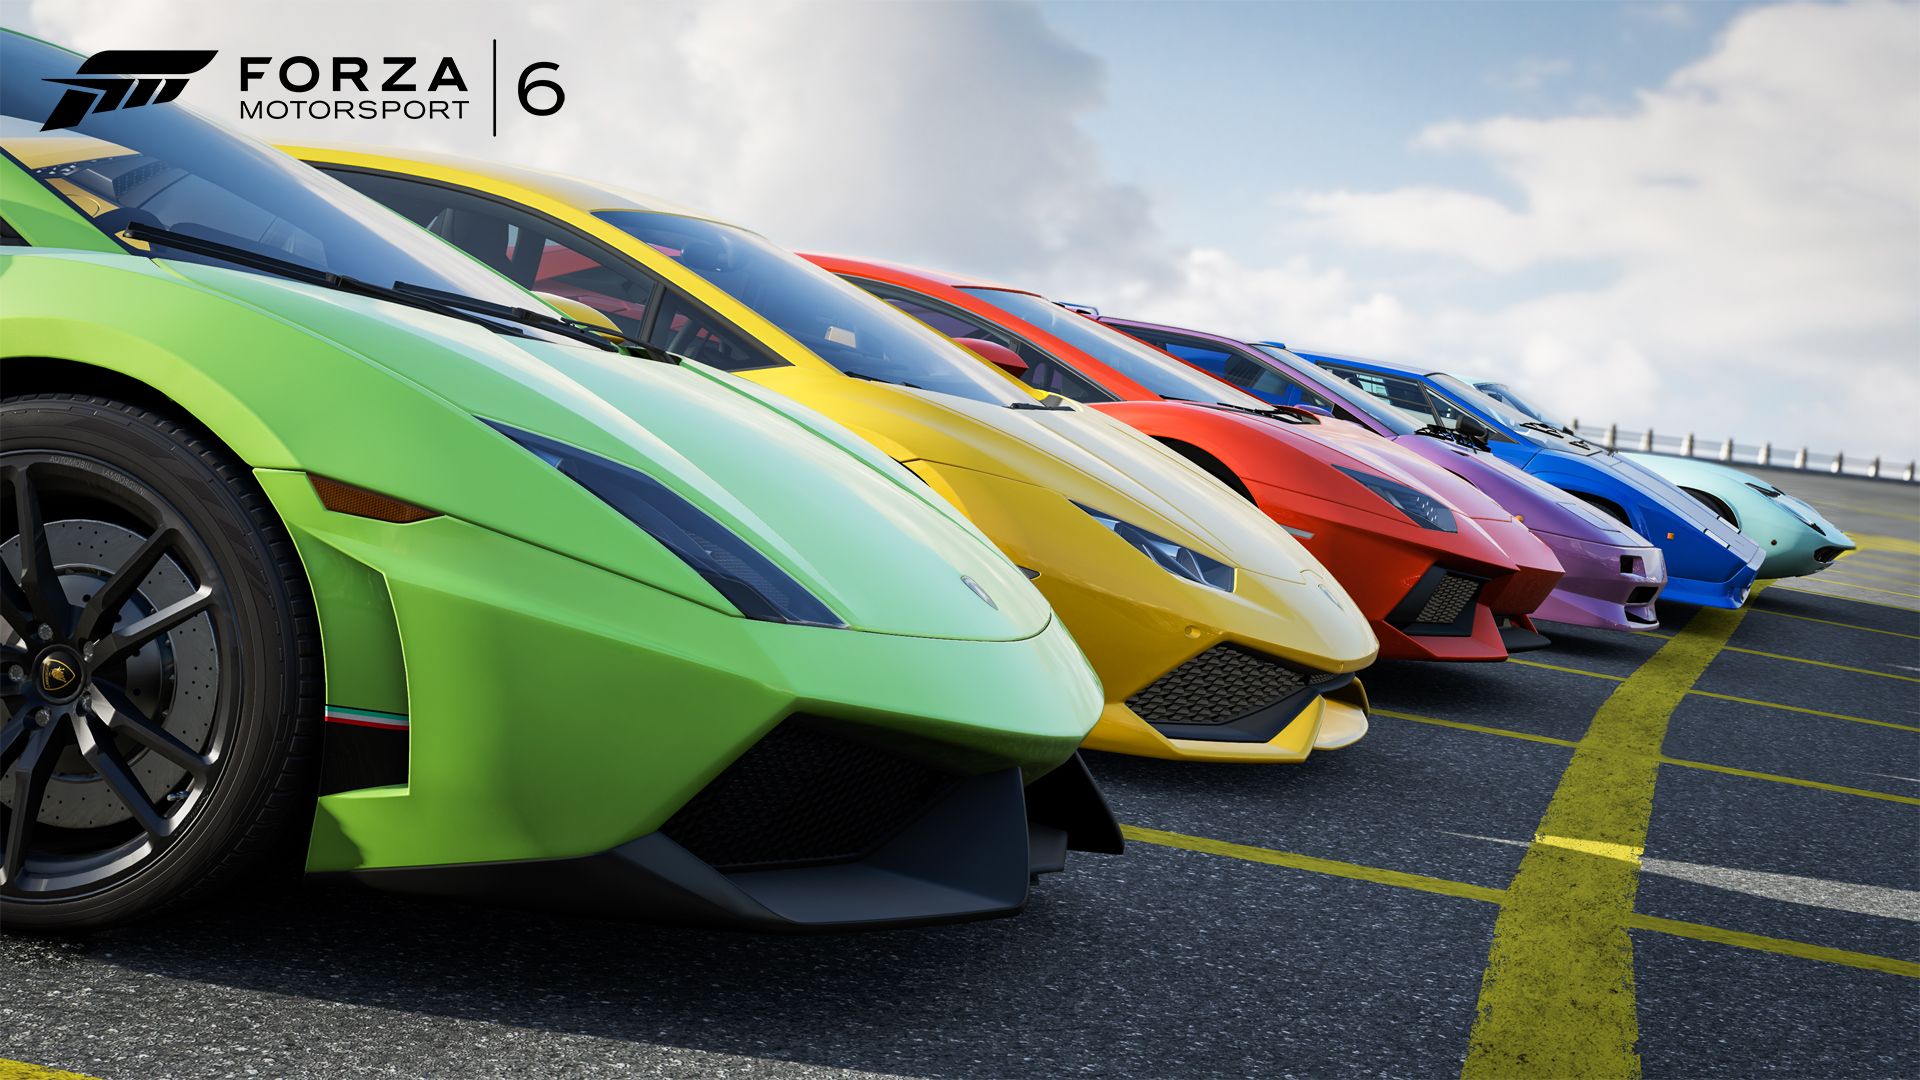 Forza Motorsport 6 could be NASCAR downloadable content